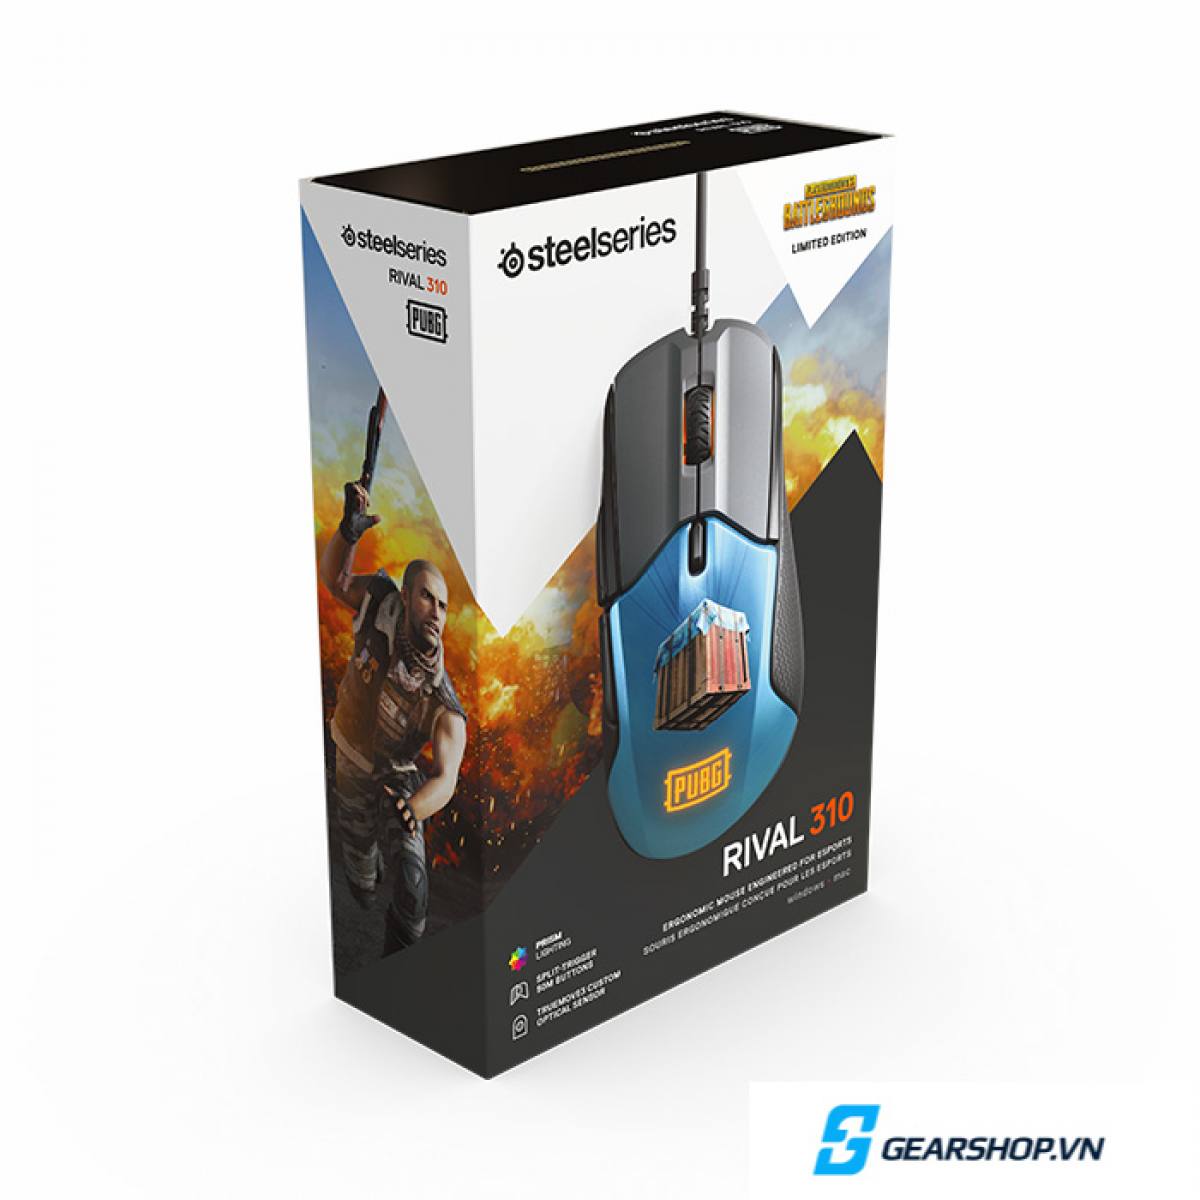 Chuột SteelSeries Rival 310 PUBG Edition